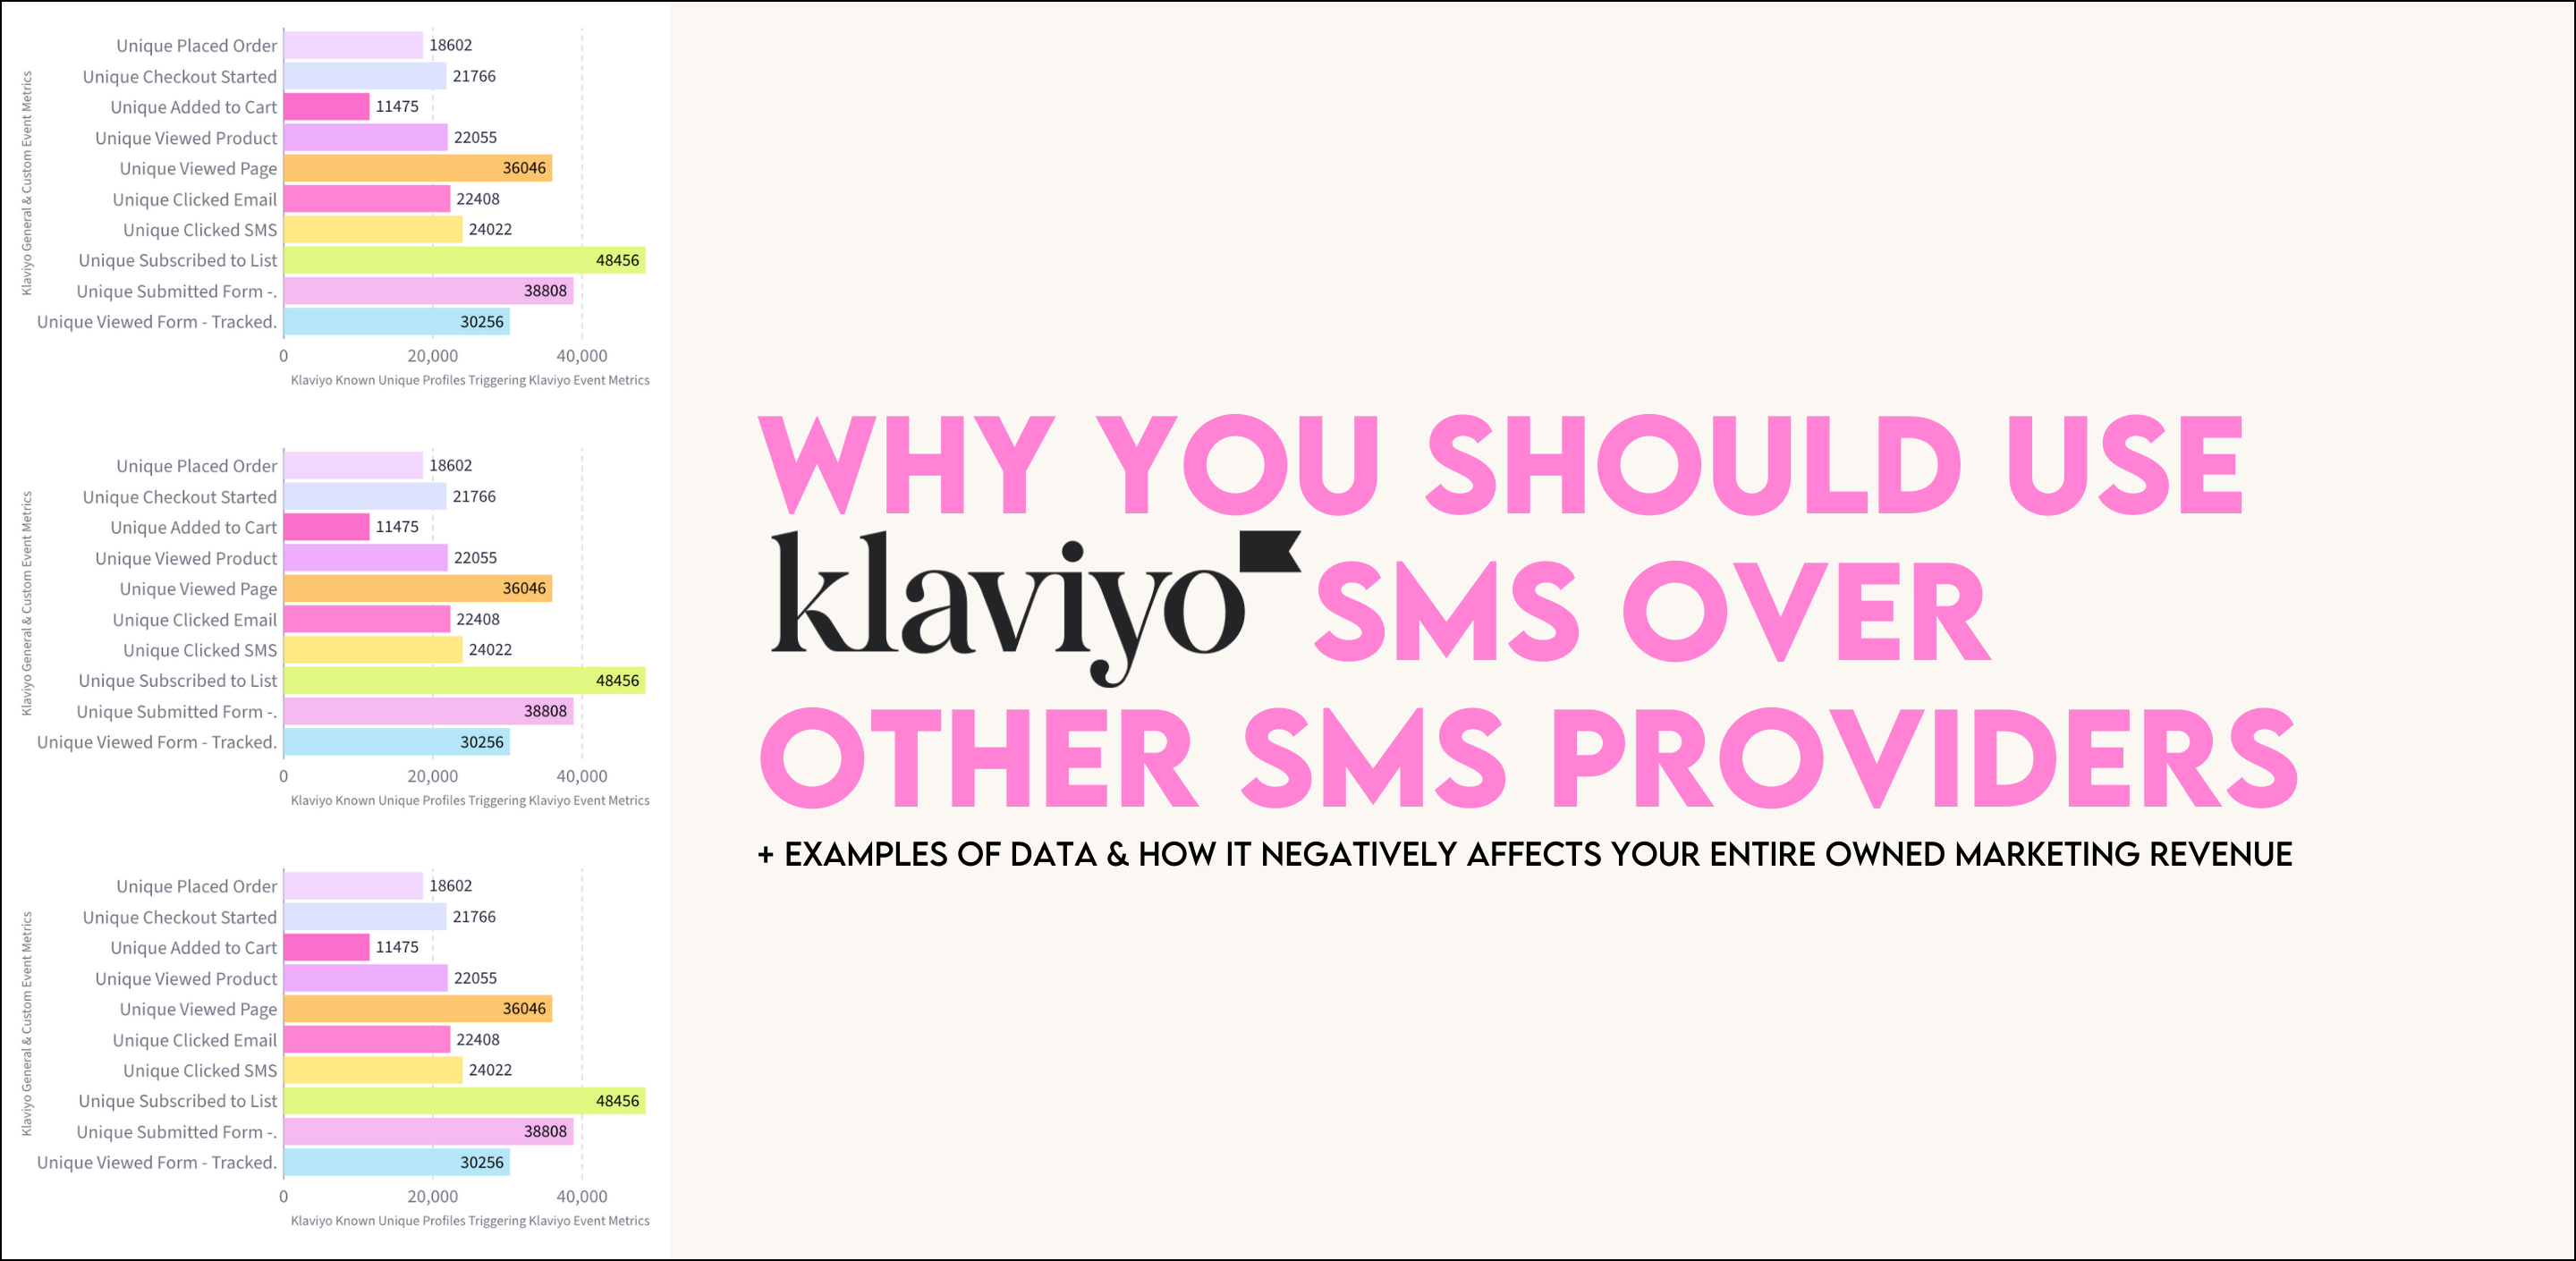 Why You Should Use Klaviyo SMS Over Other SMS Providers (+Examples of Real Data)